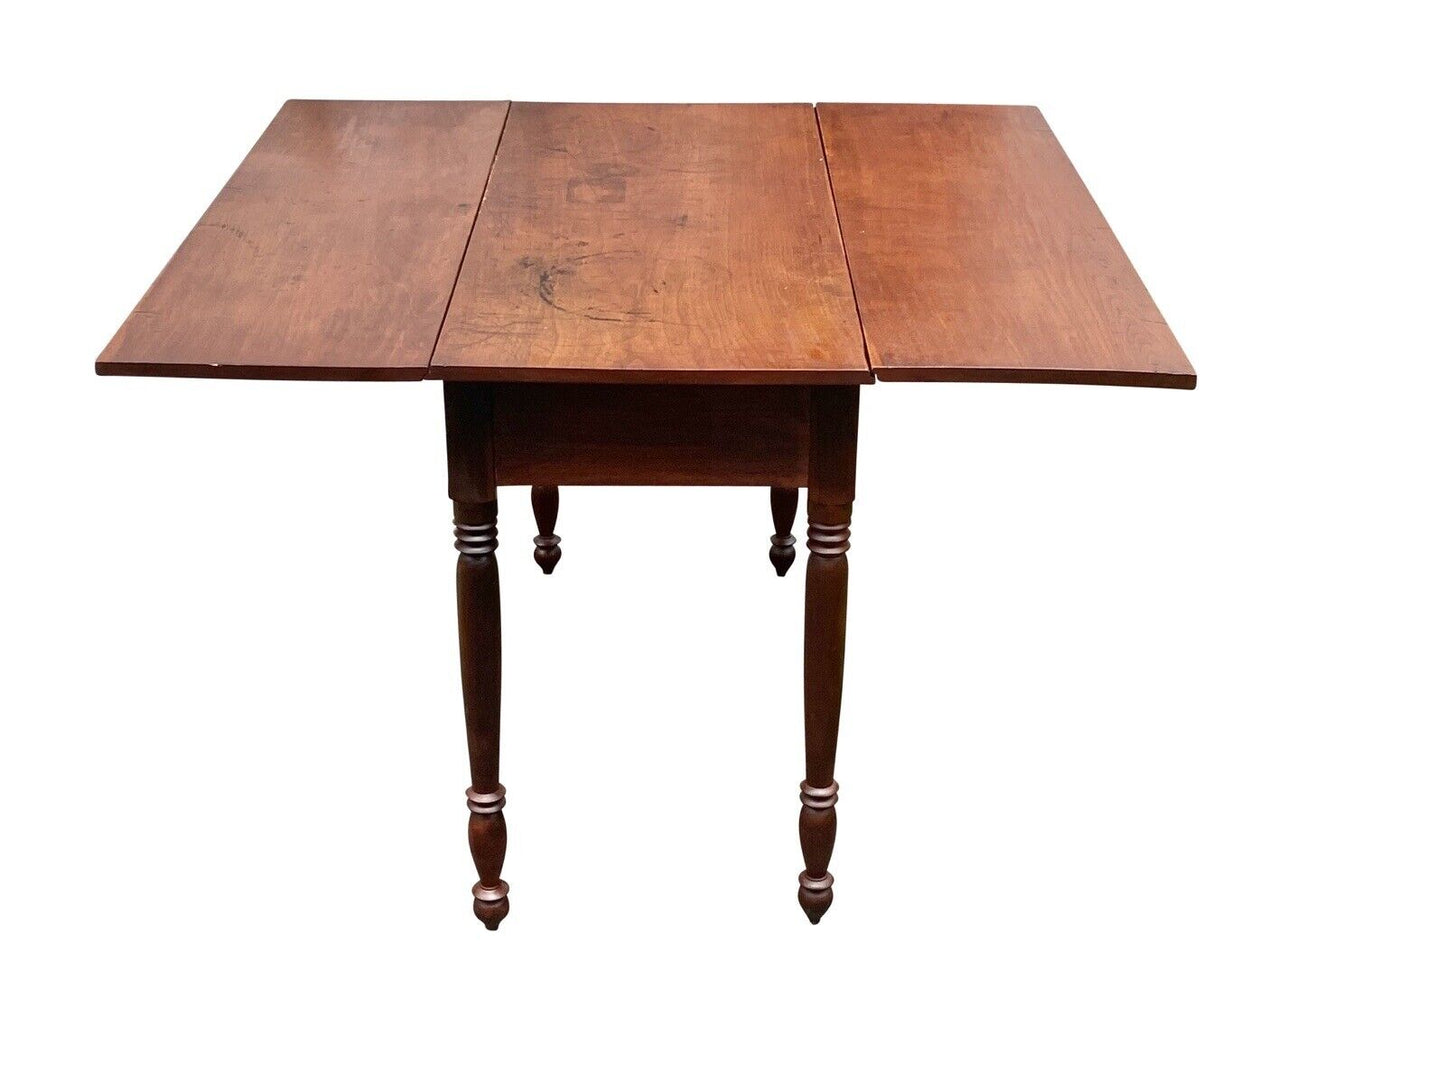 Antique New England Cherry Drop Leaf Dining Table / Farmhouse Table